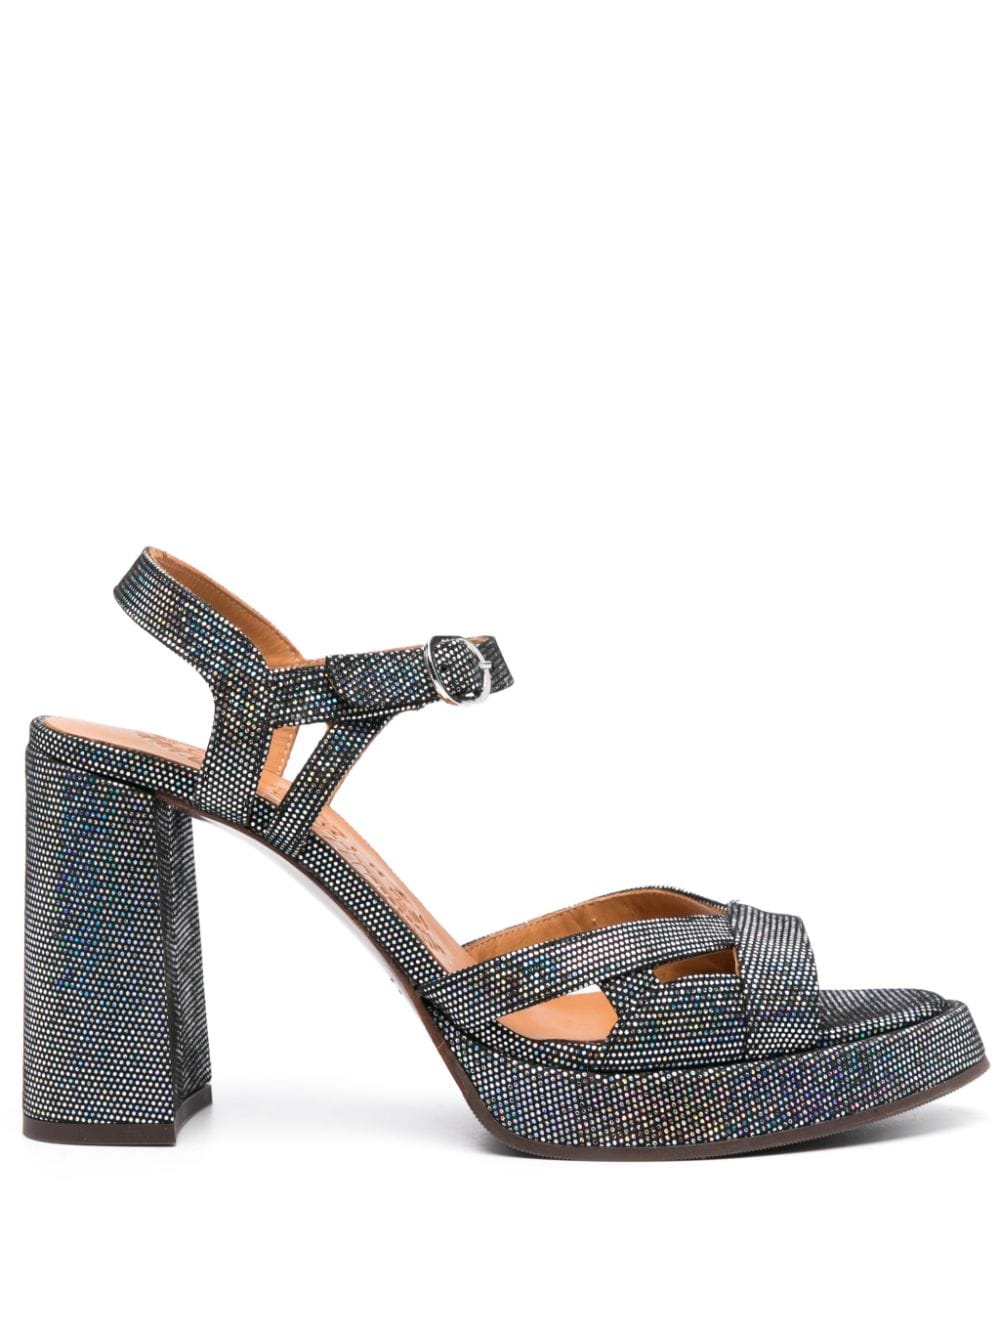 Chie Mihara Abeba 105mm Leather Sandals In Black